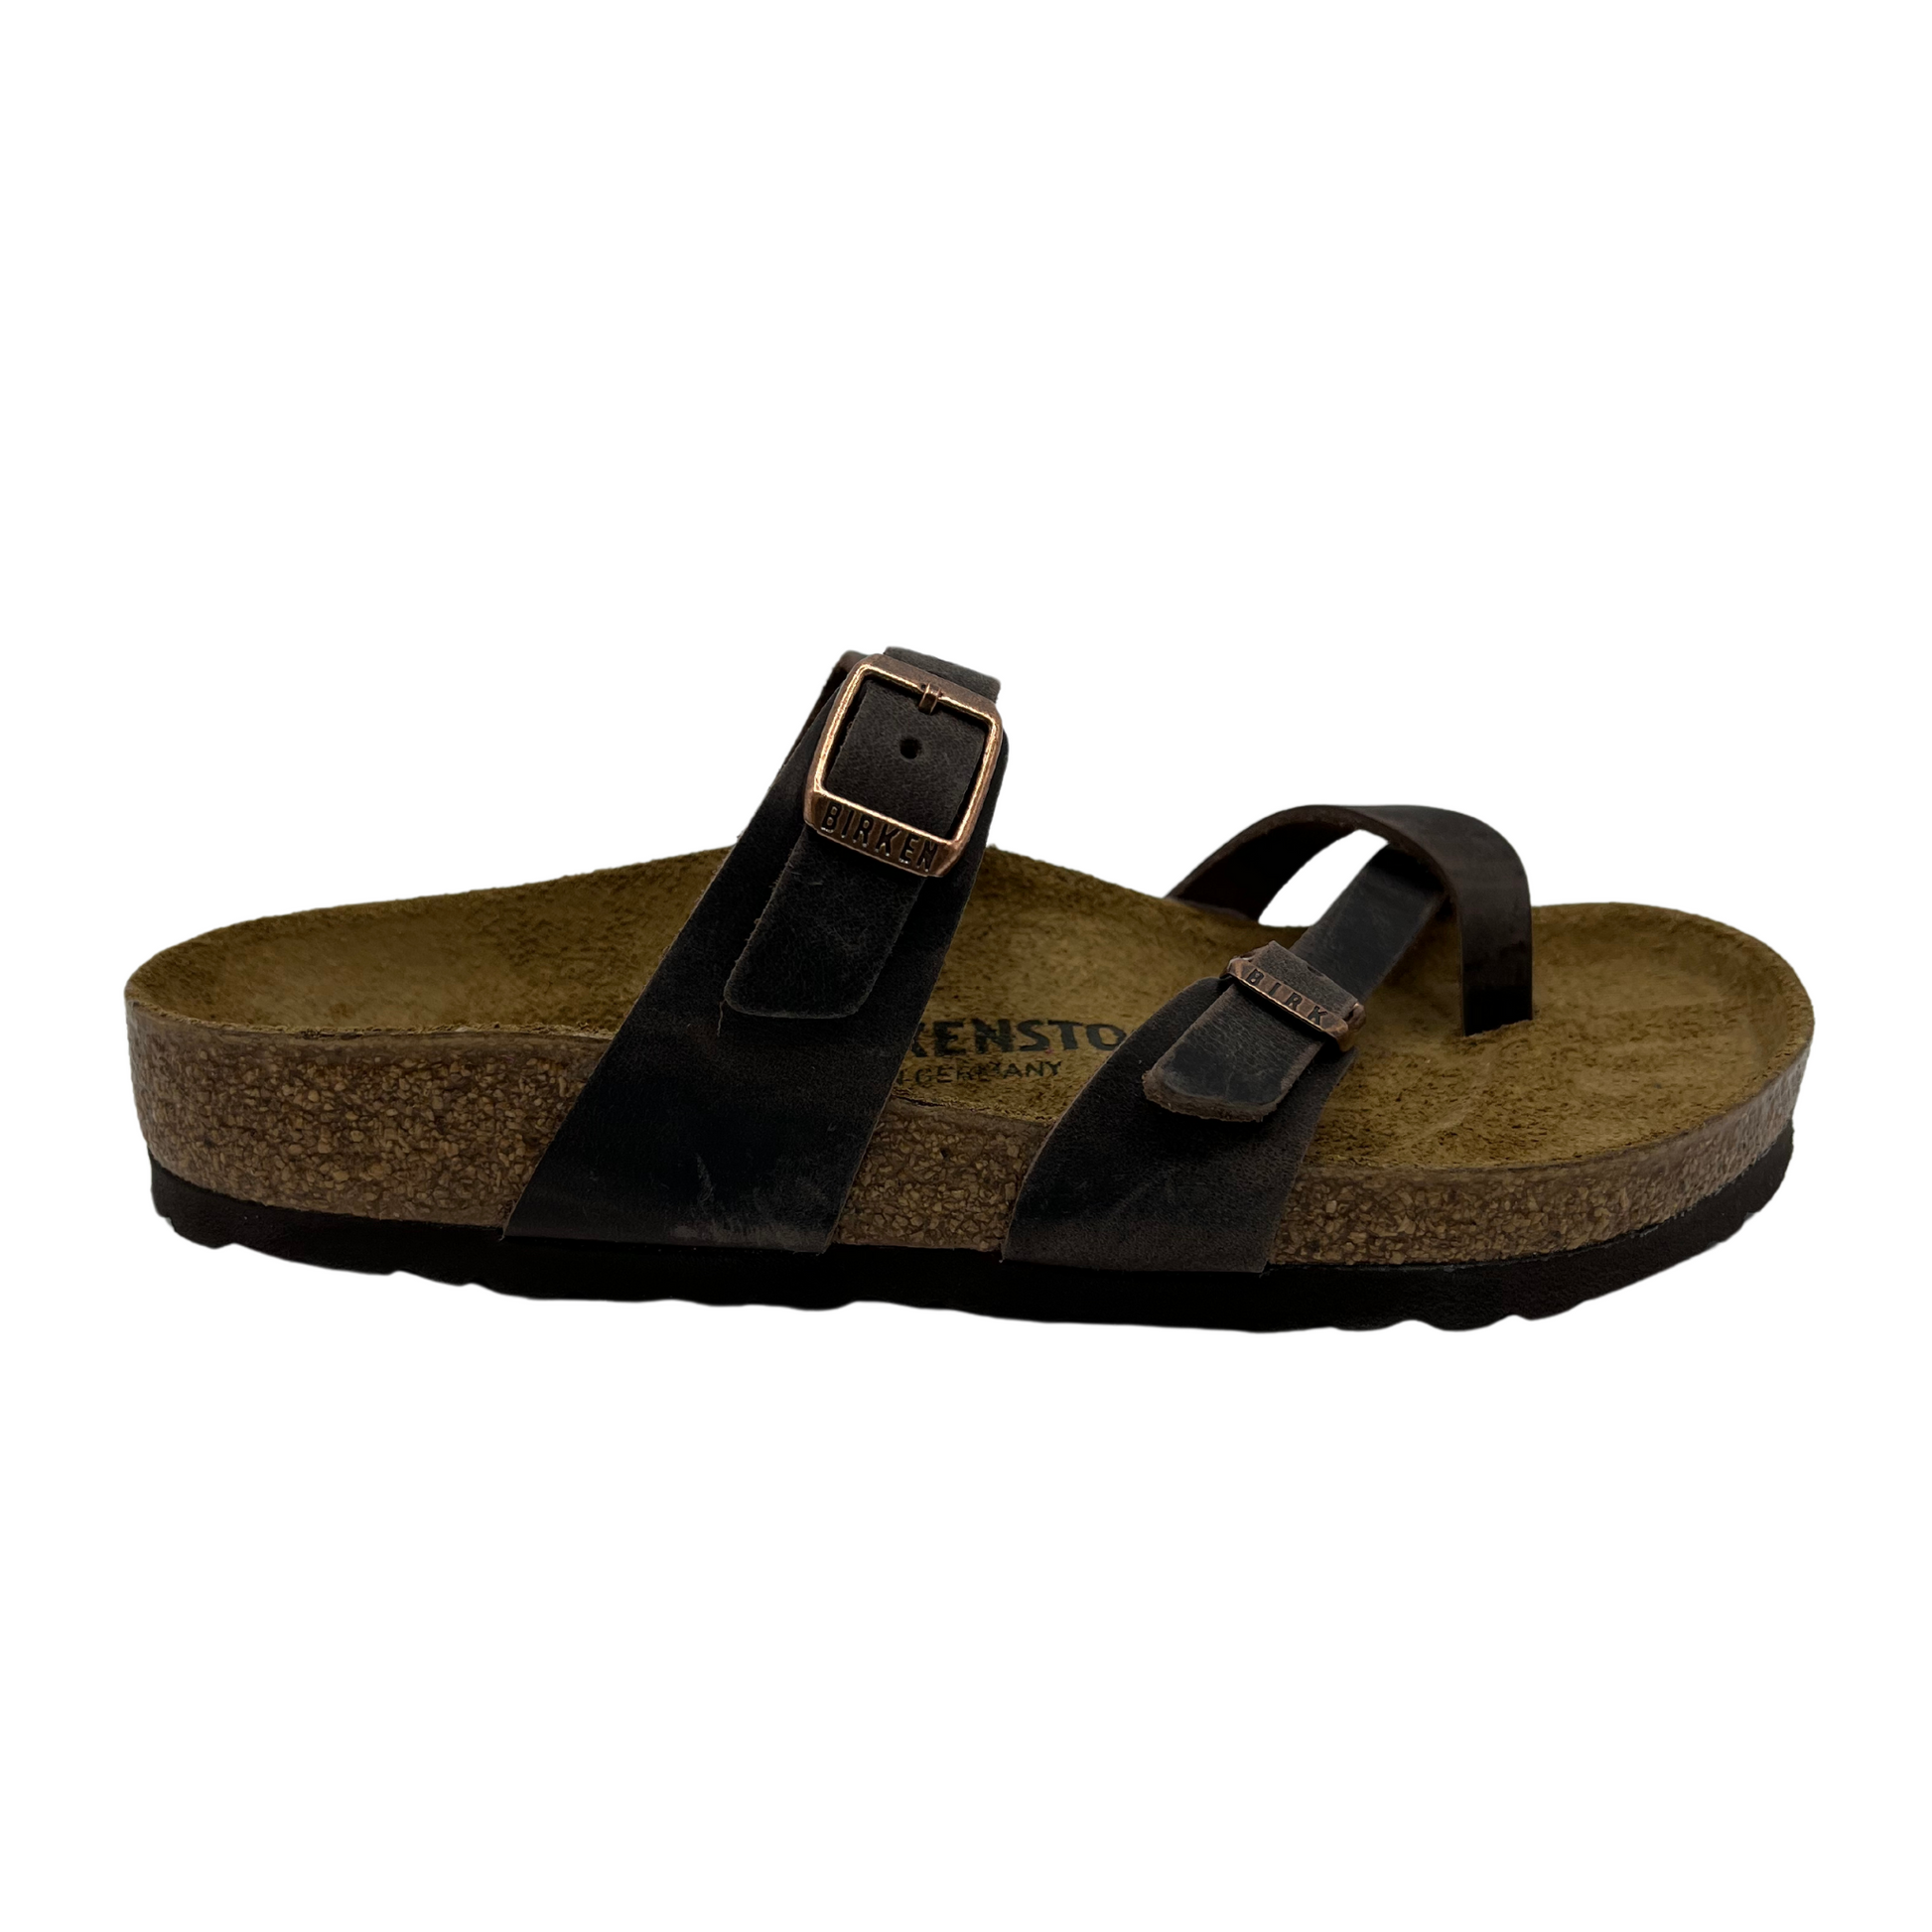 Right facing view of oiled leather strapped sandals with two pin buckle straps, suede lined contoured cork footbed